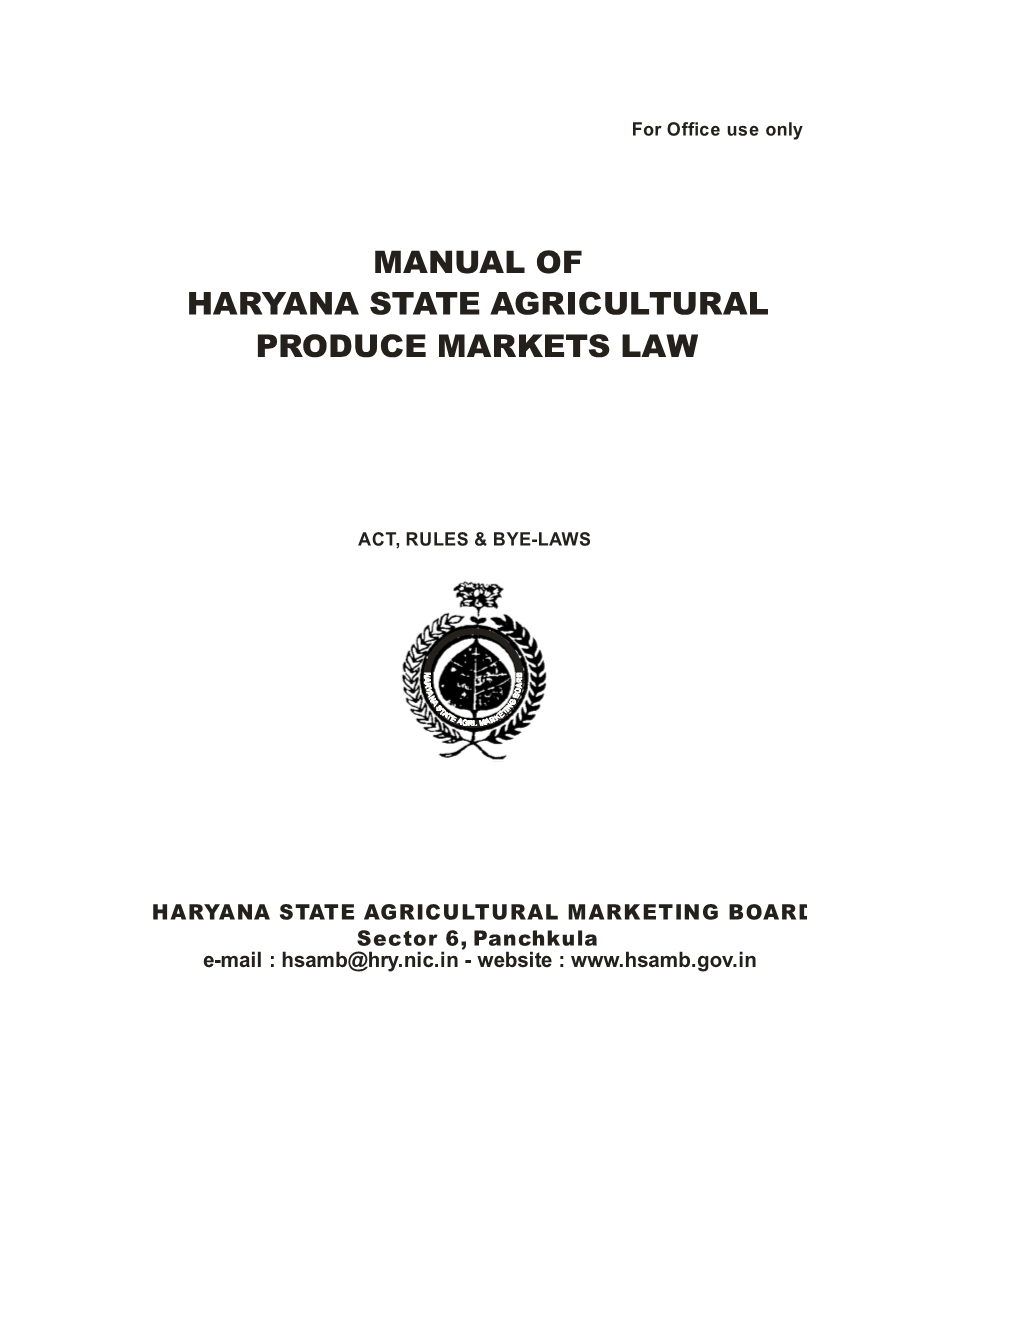 The Punjab Agricultural Produce Markets Act, 1961